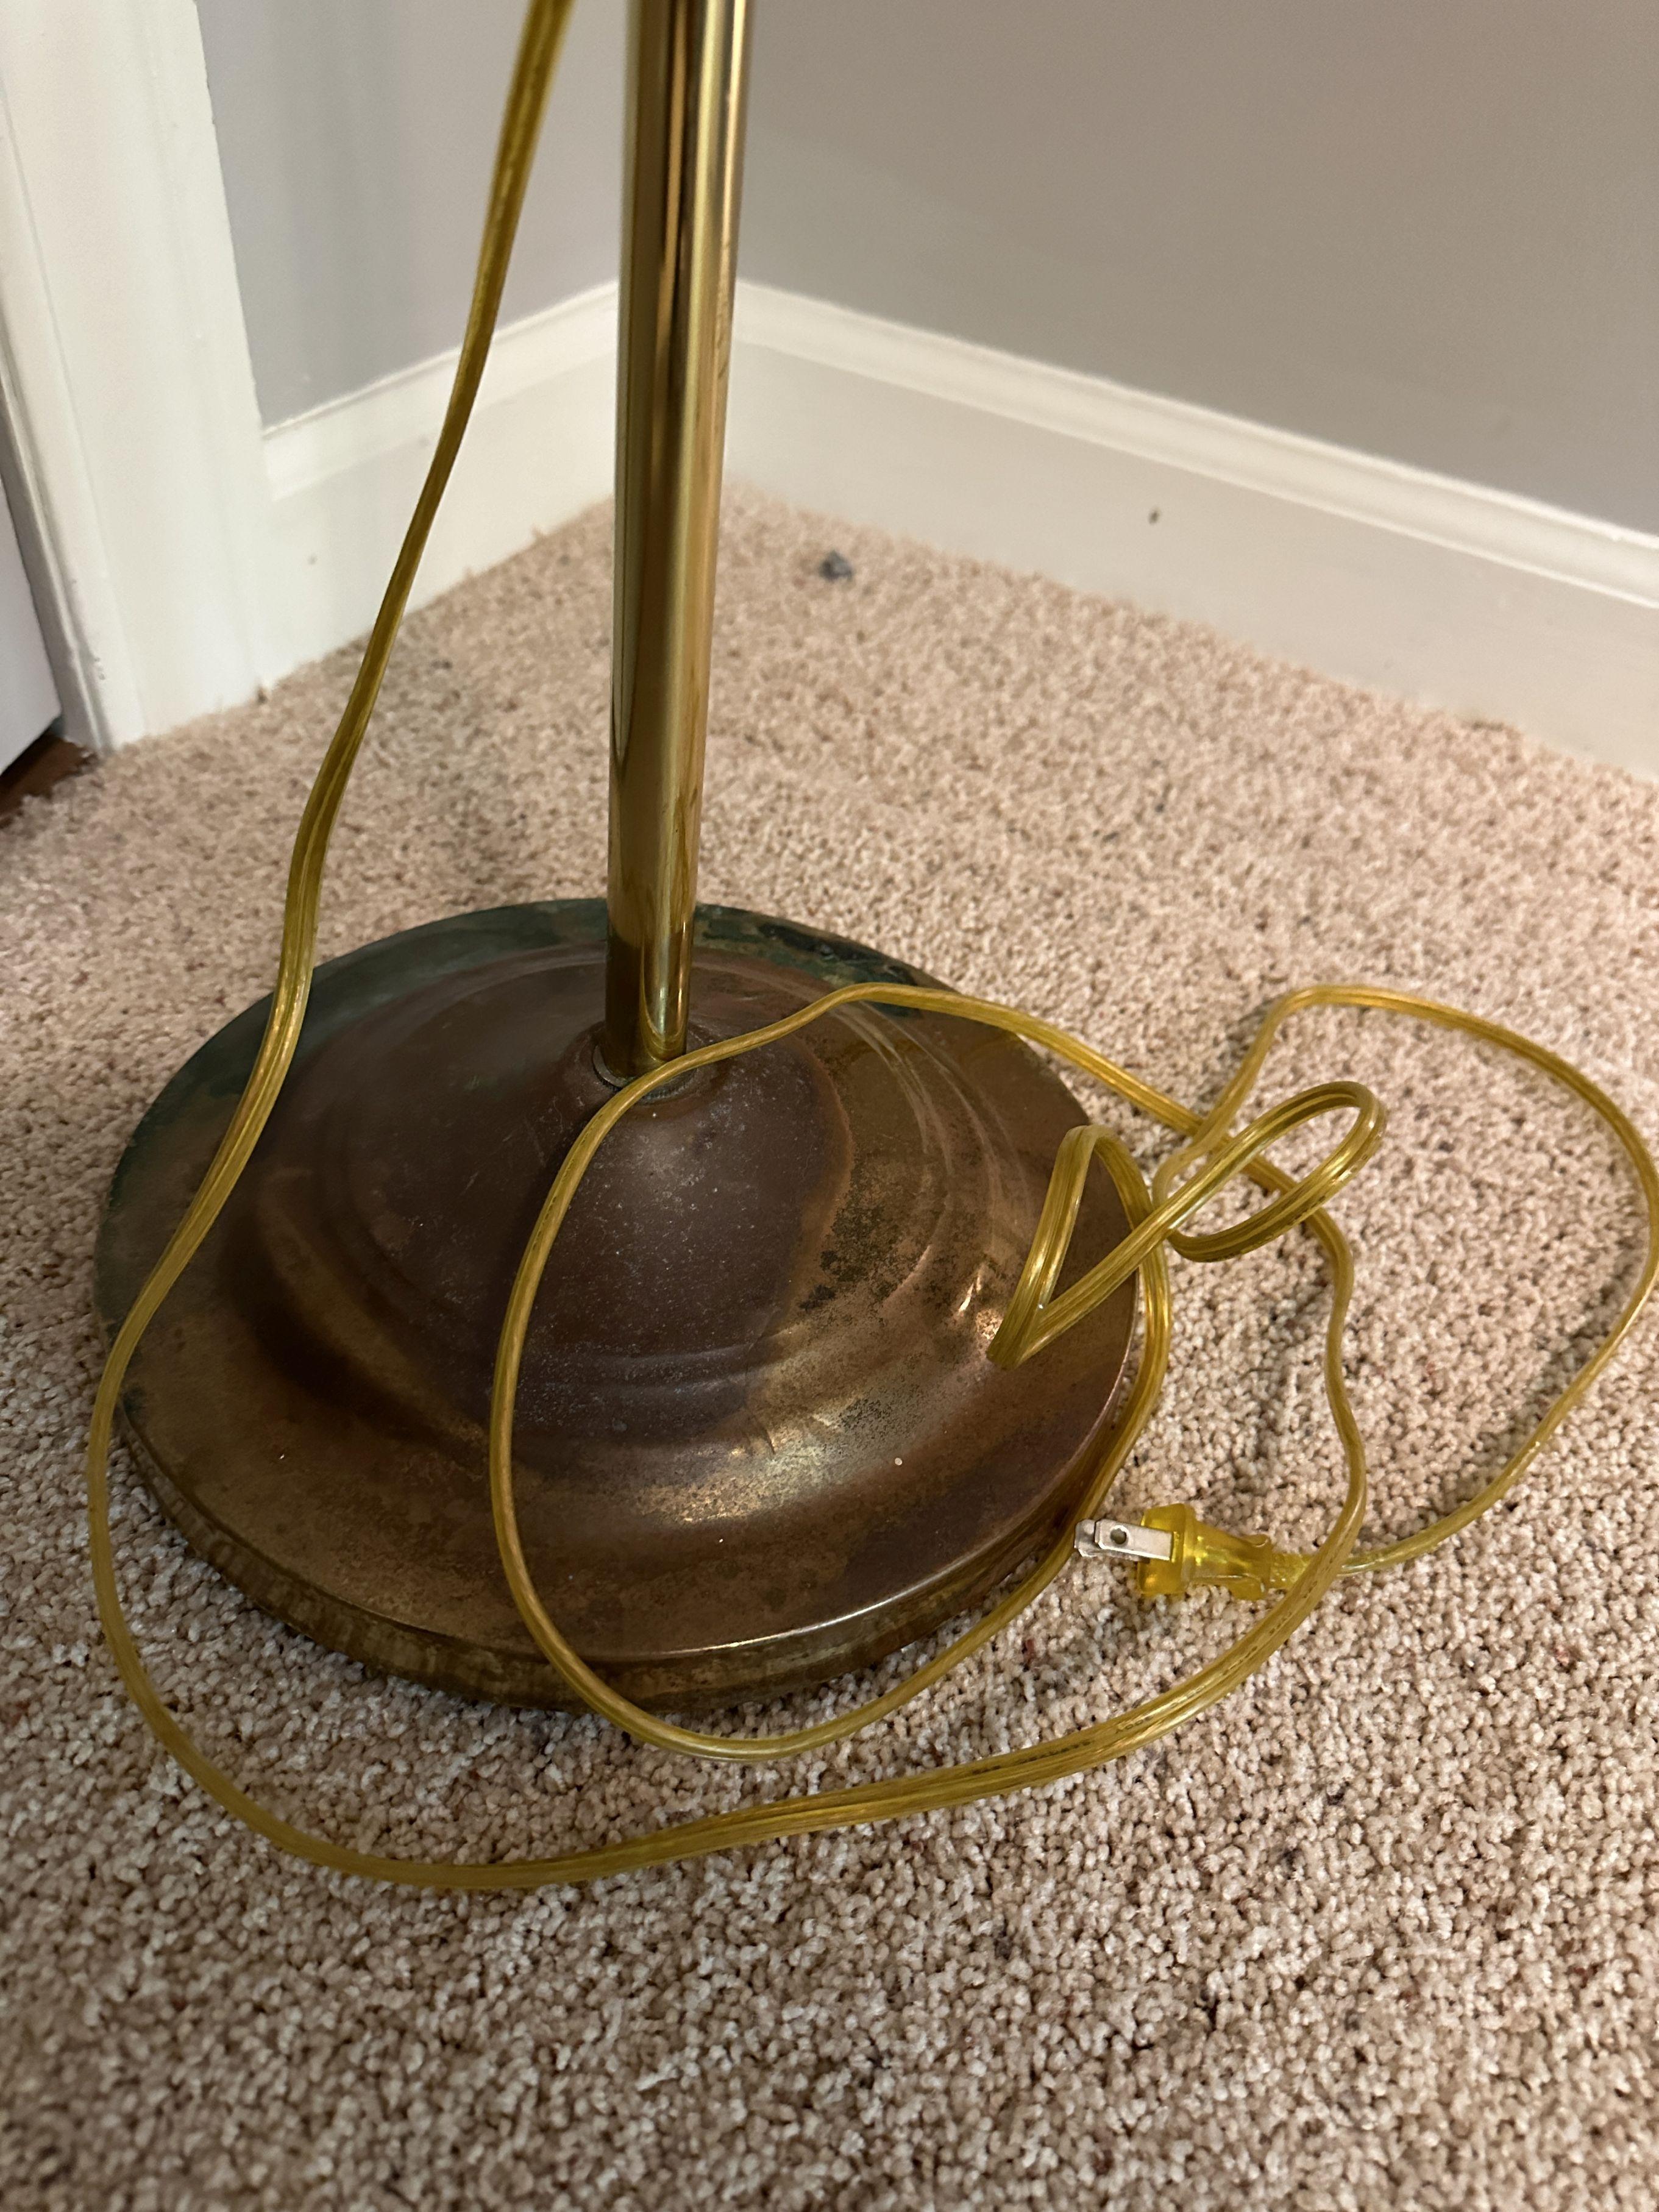 Approx 4 Foot Tall Floor Lamp (Local Pick Up Only)